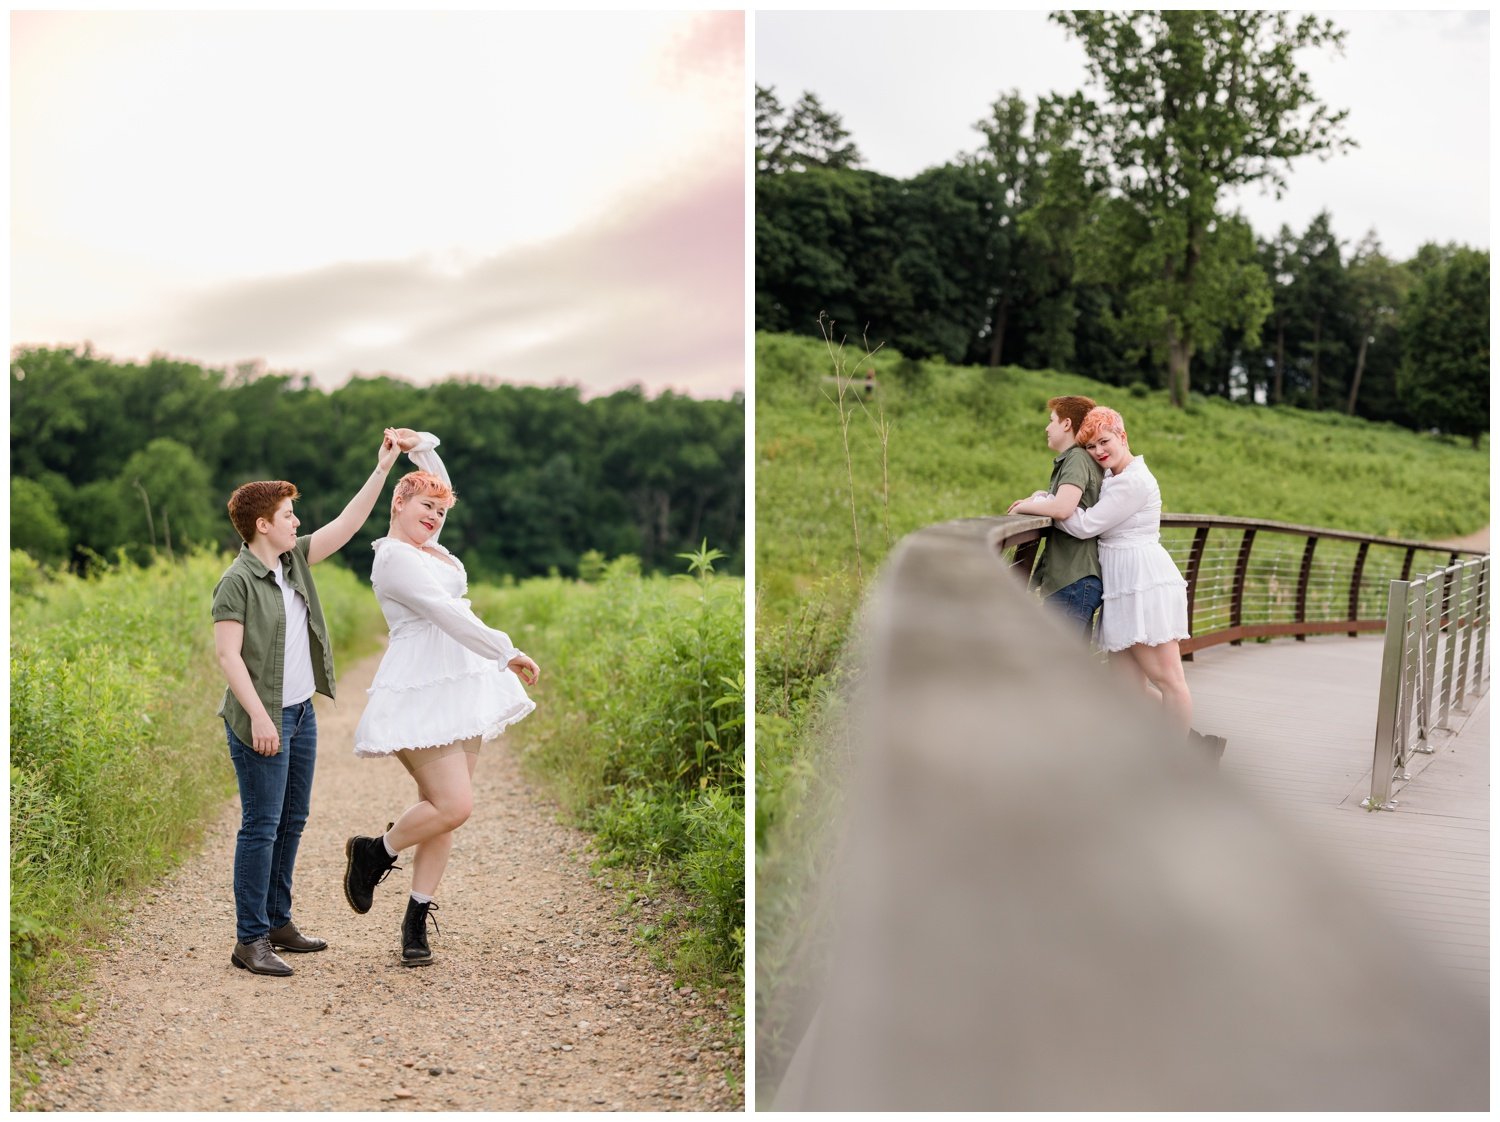 Queer-Engagement-Photos-Longwood-Gardens-Philly-Photographer-LGBTQ-15.jpg